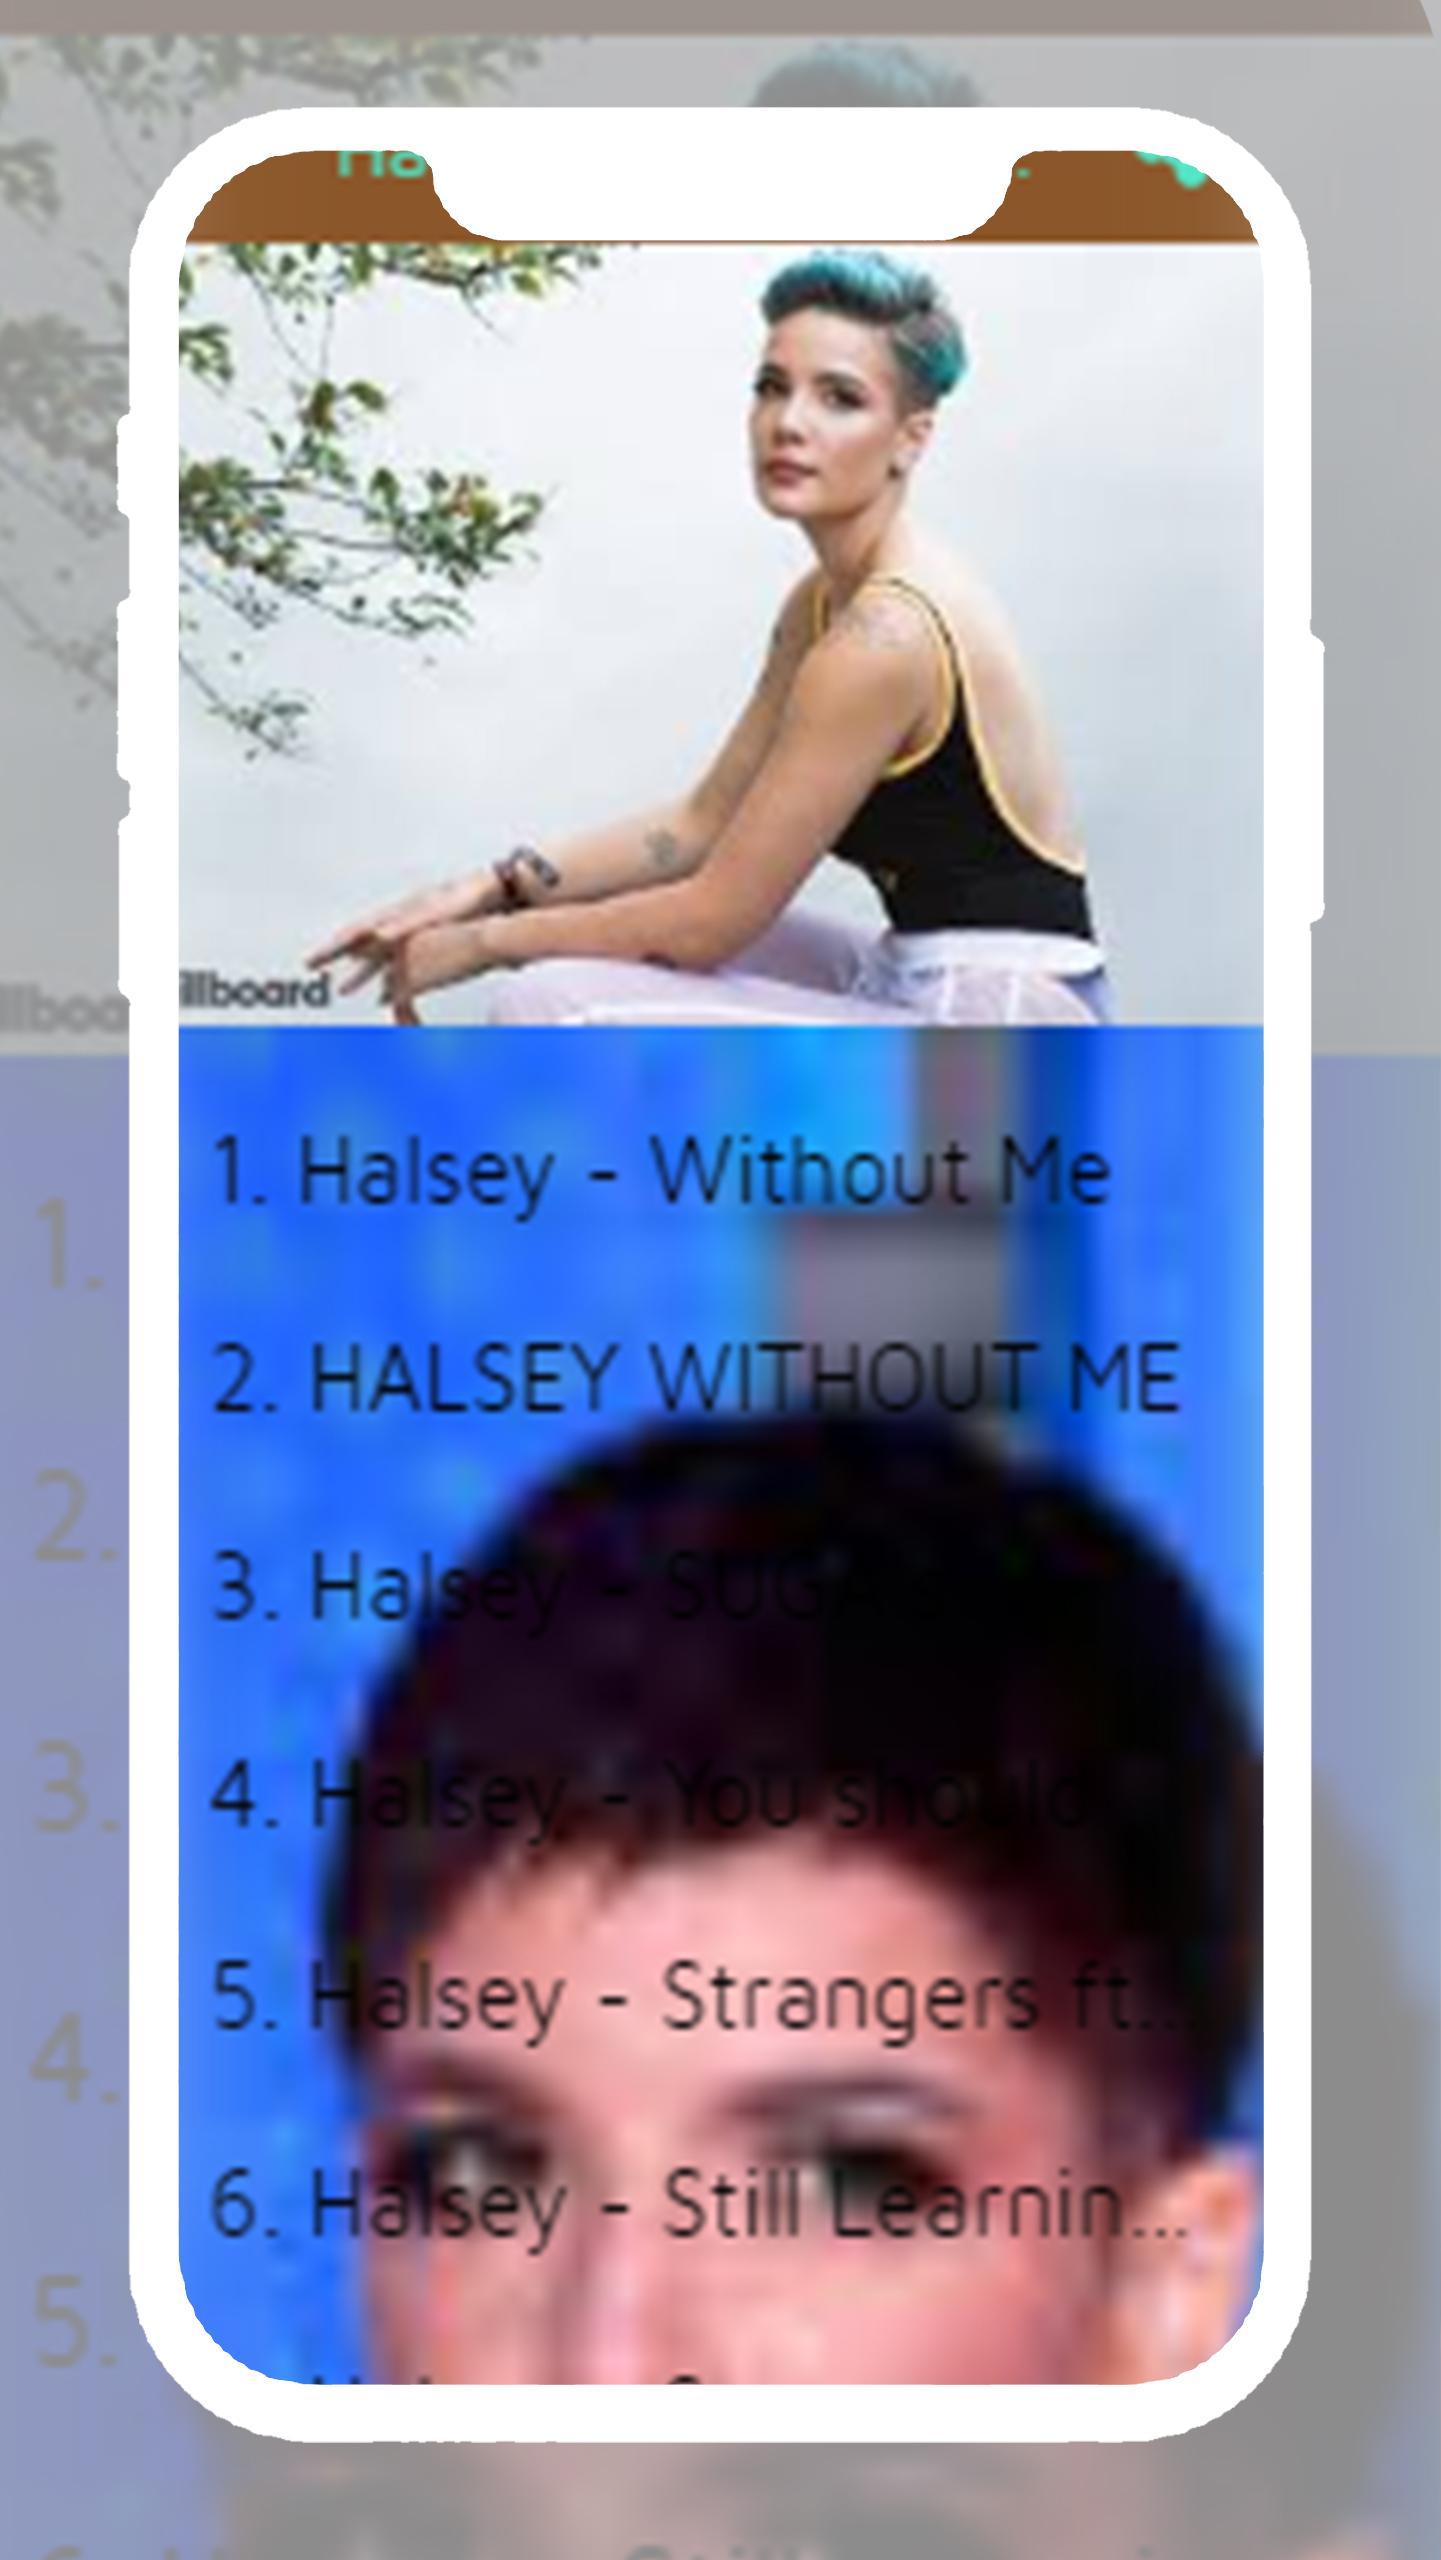 Halsey-Without Me Offline Mp3 for Android - APK Download